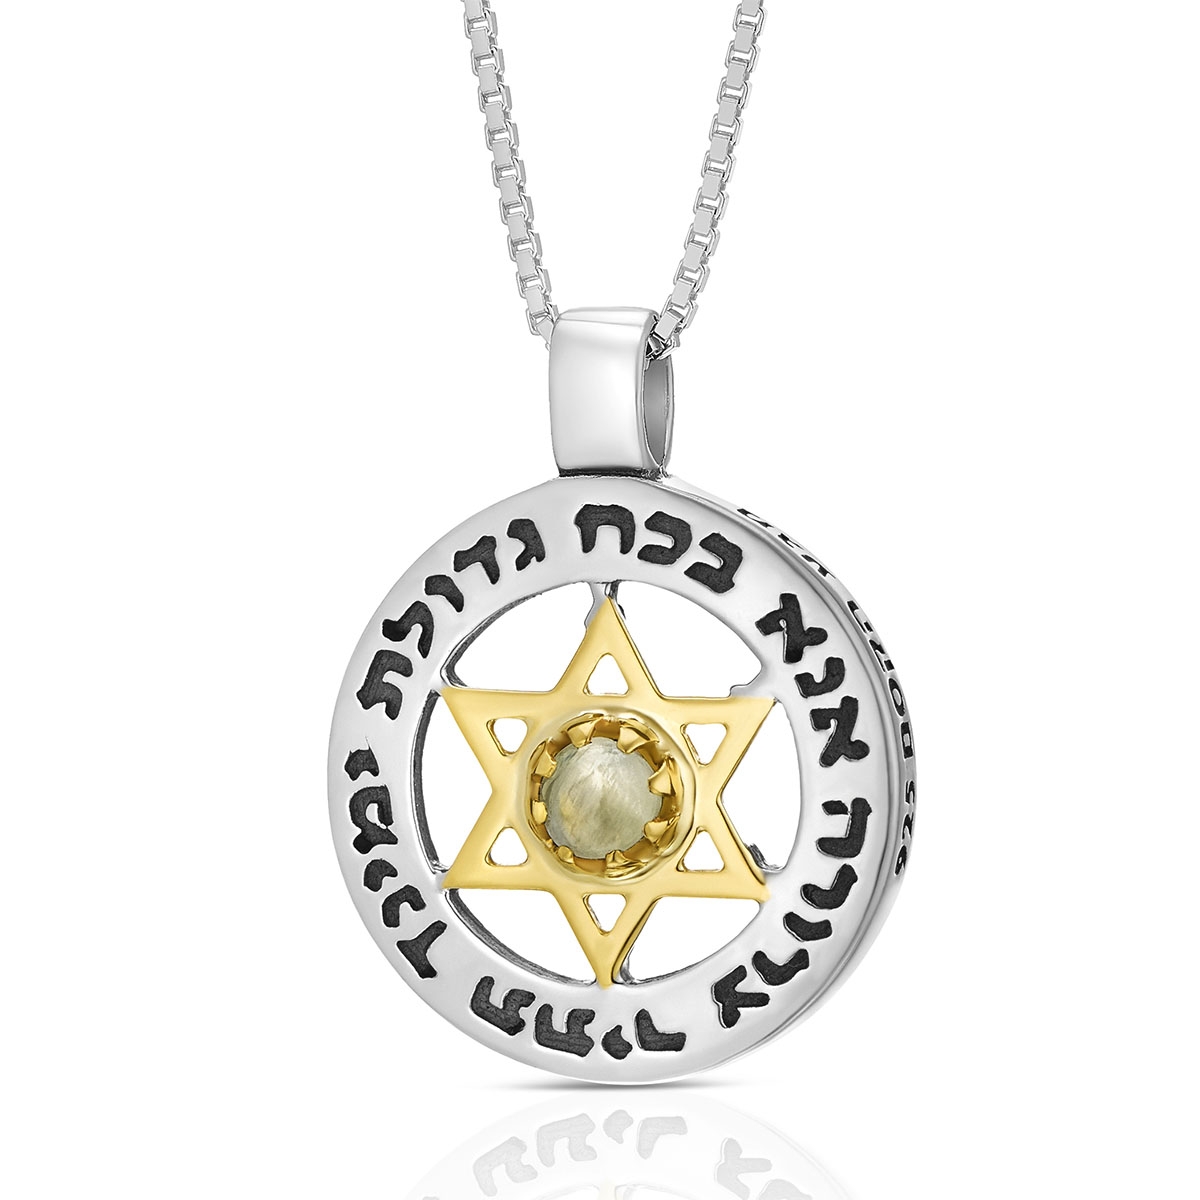 Porat Yosef: Silver and 9K Gold Star of David Necklace with Cat's Eye Stone - 1